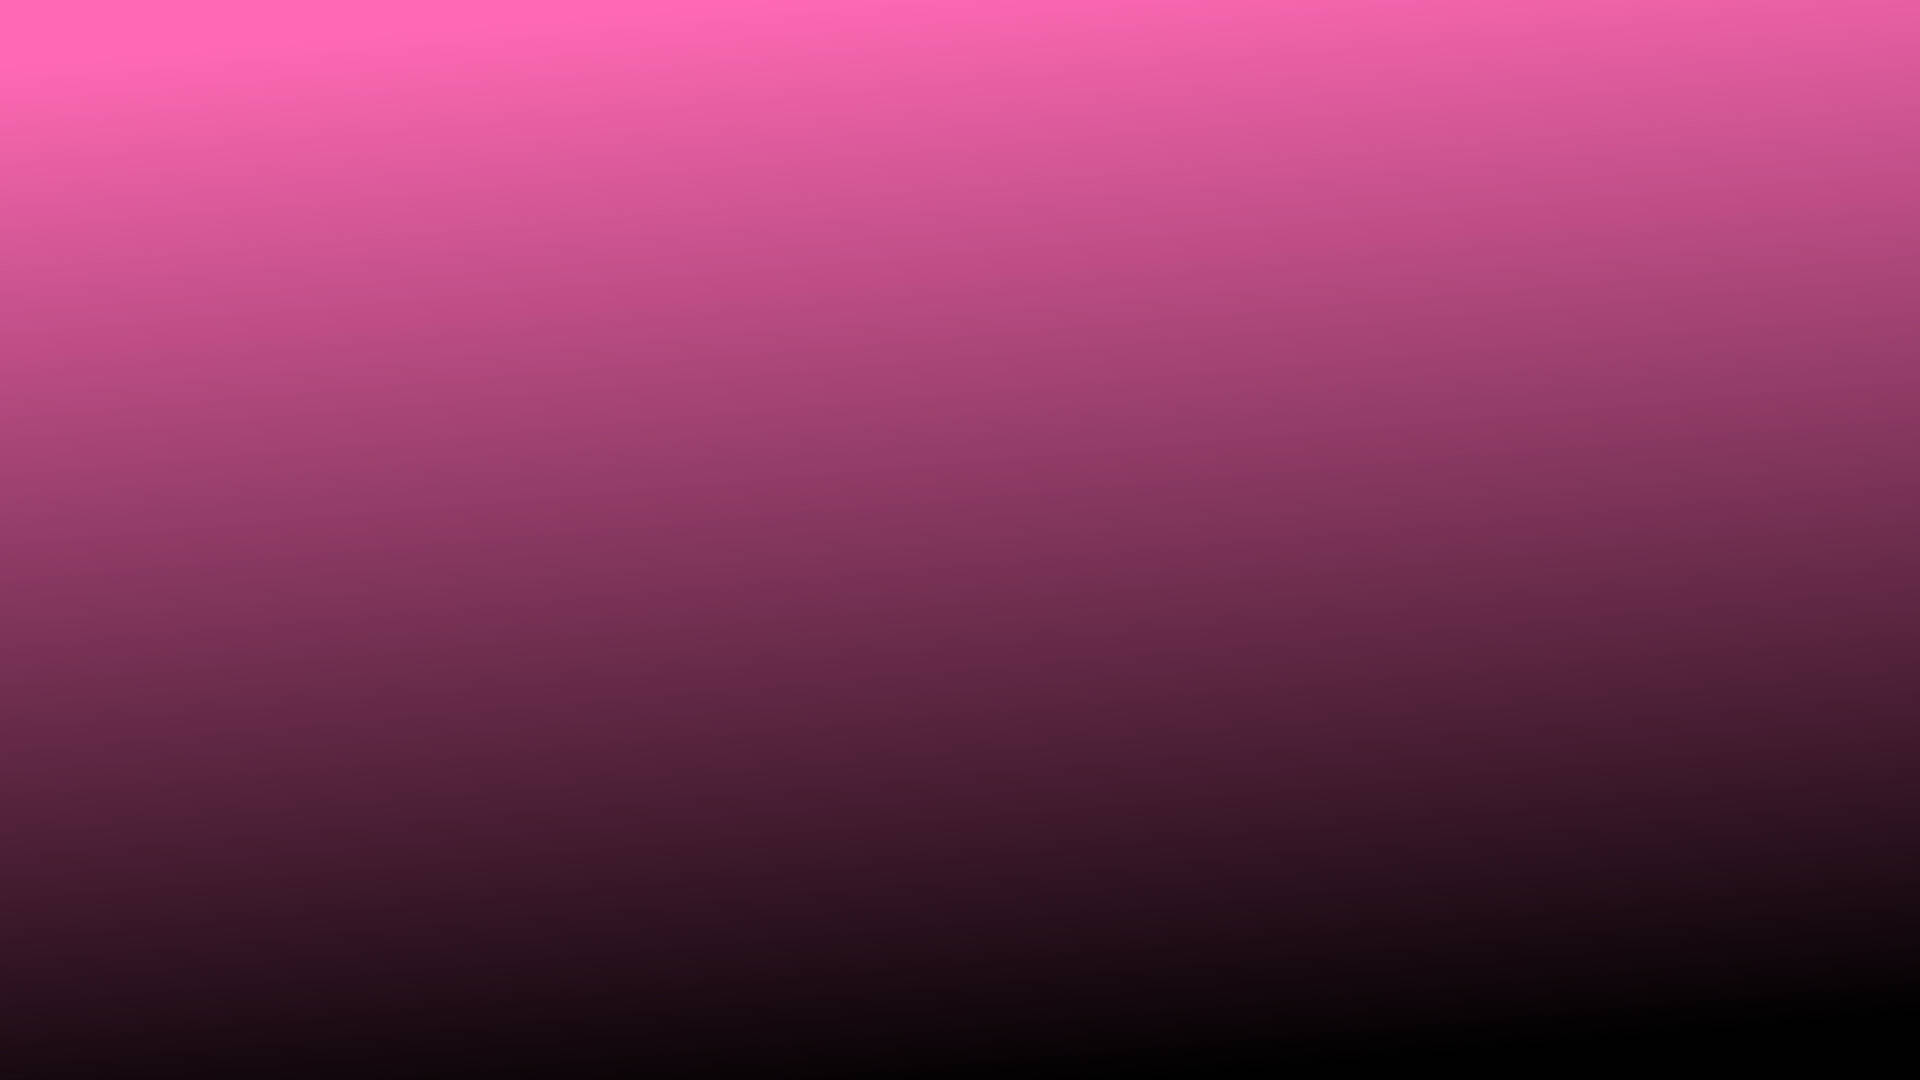 200+] Black And Pink Aesthetic Wallpapers 